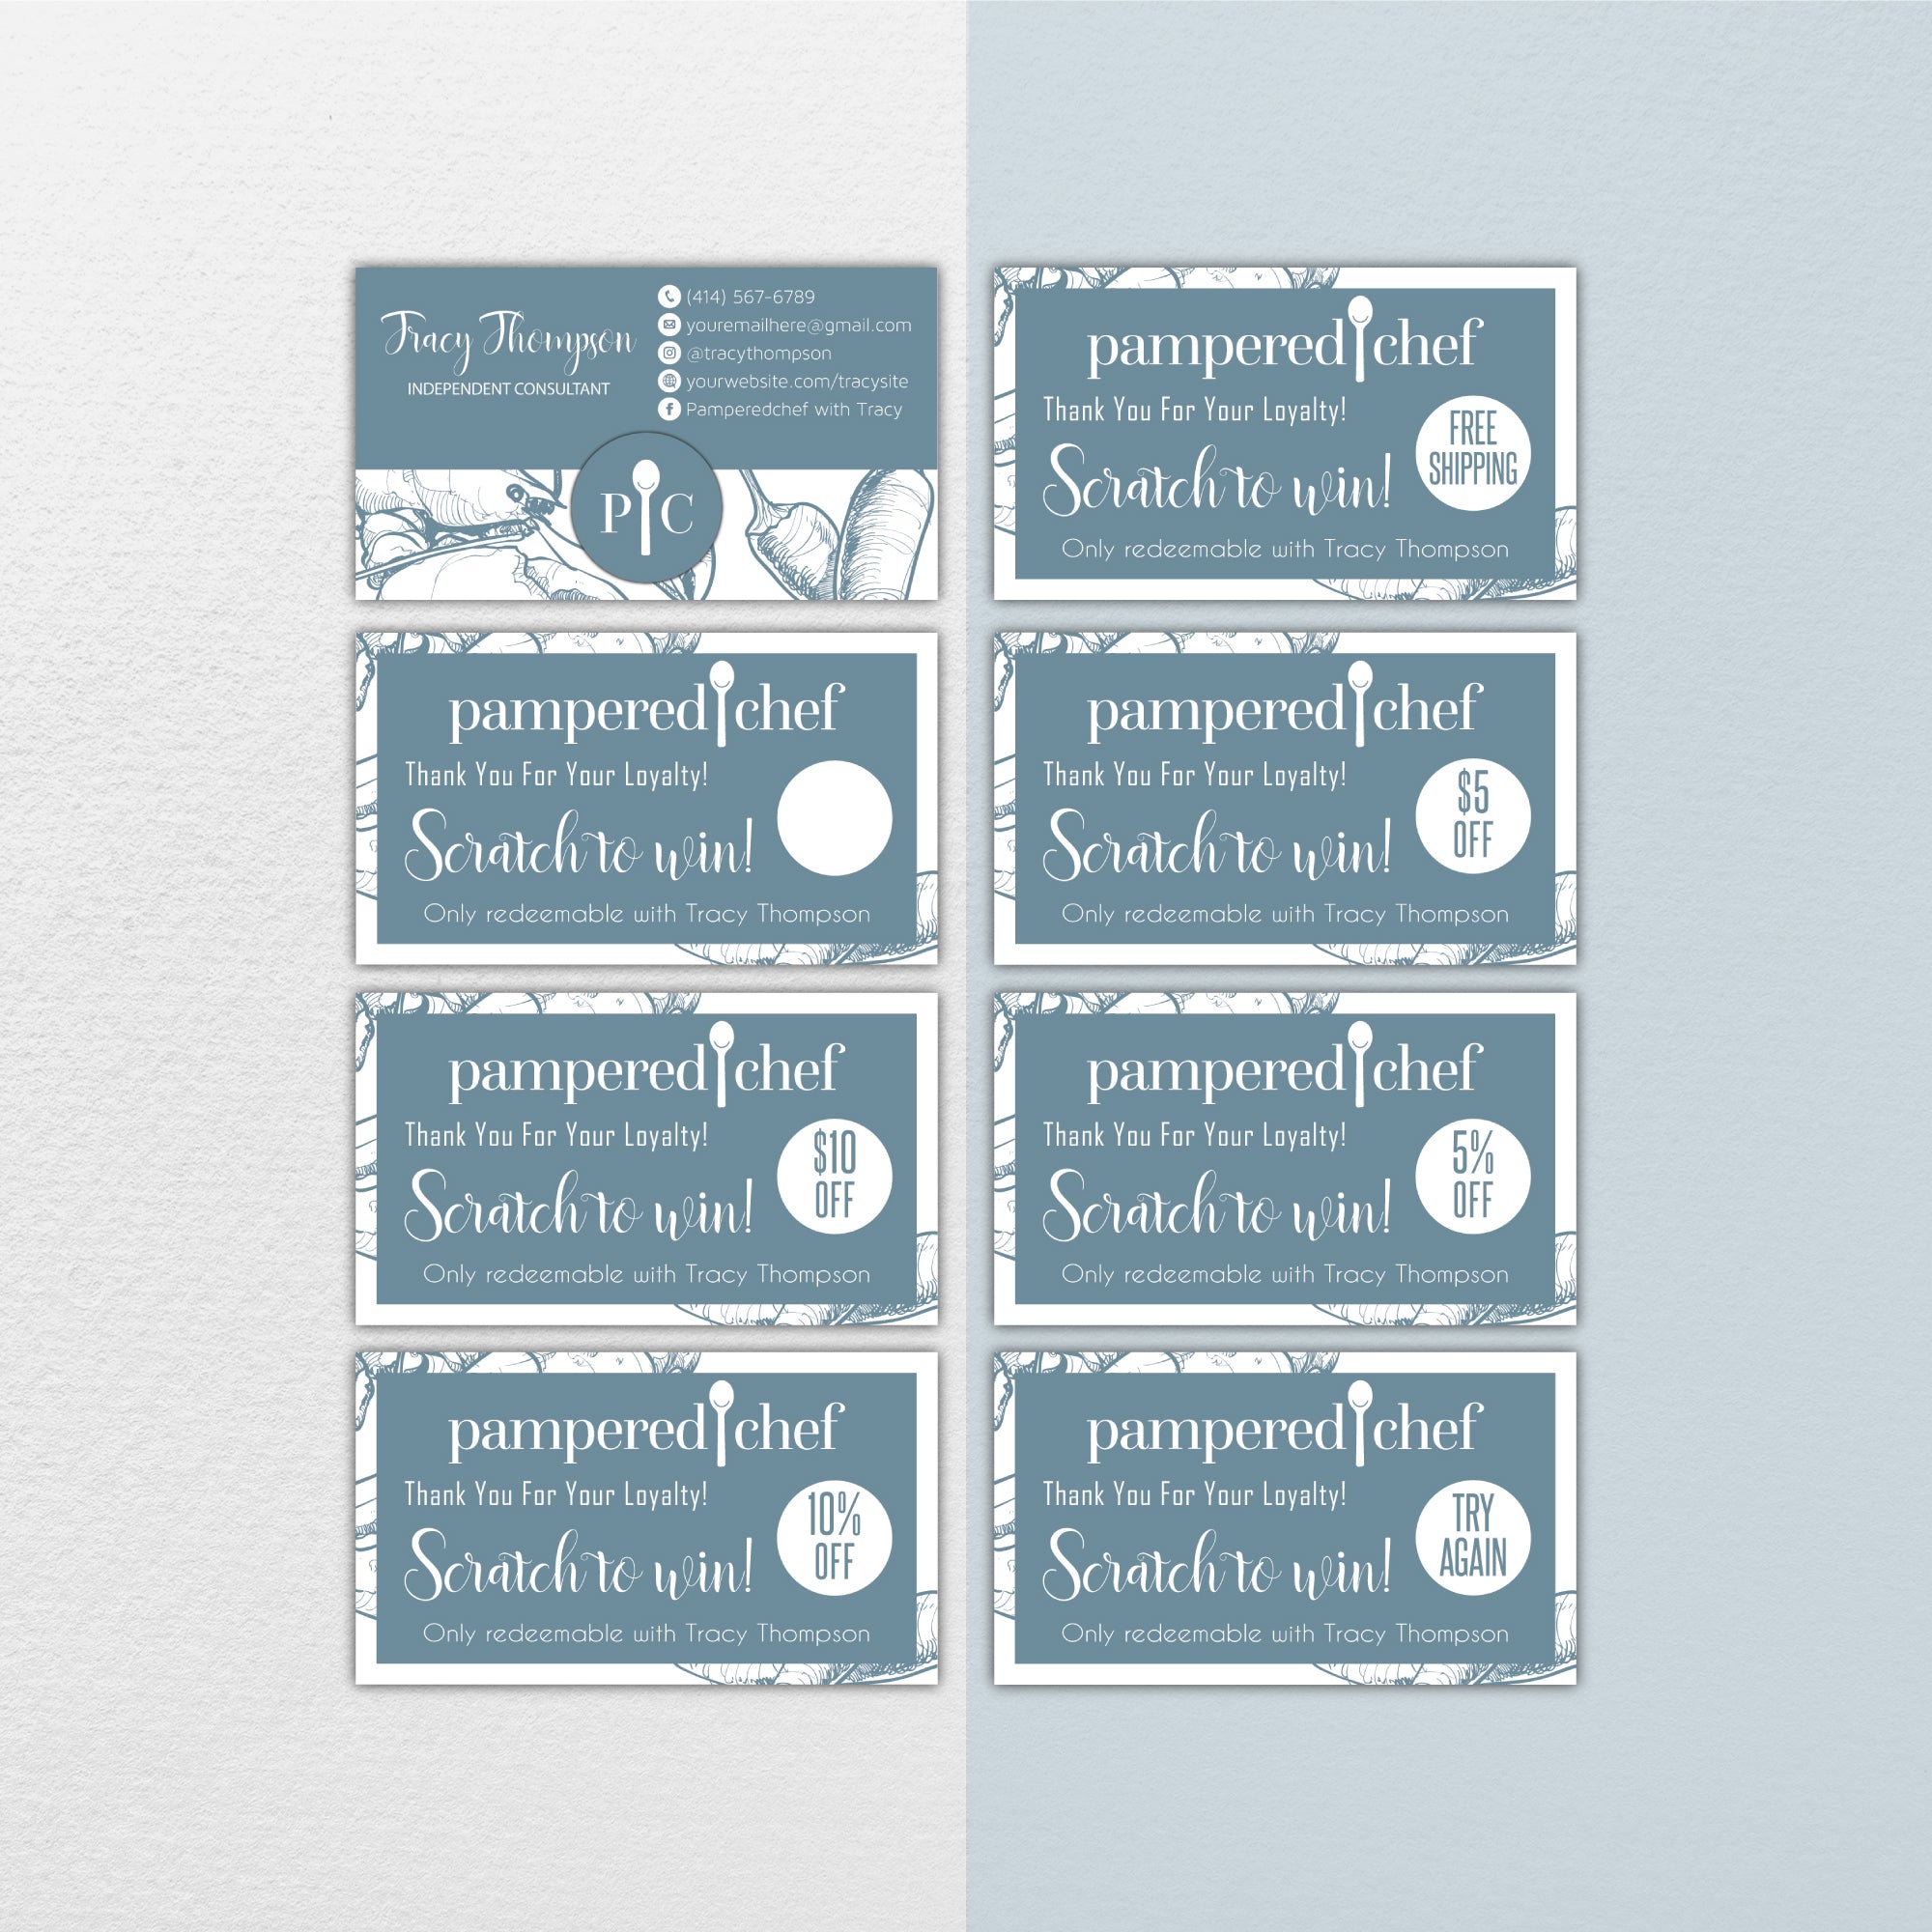 Pampered Chef Scratch Off Card Pampered Chef Scratch To Win Card Ppc02 Toboart